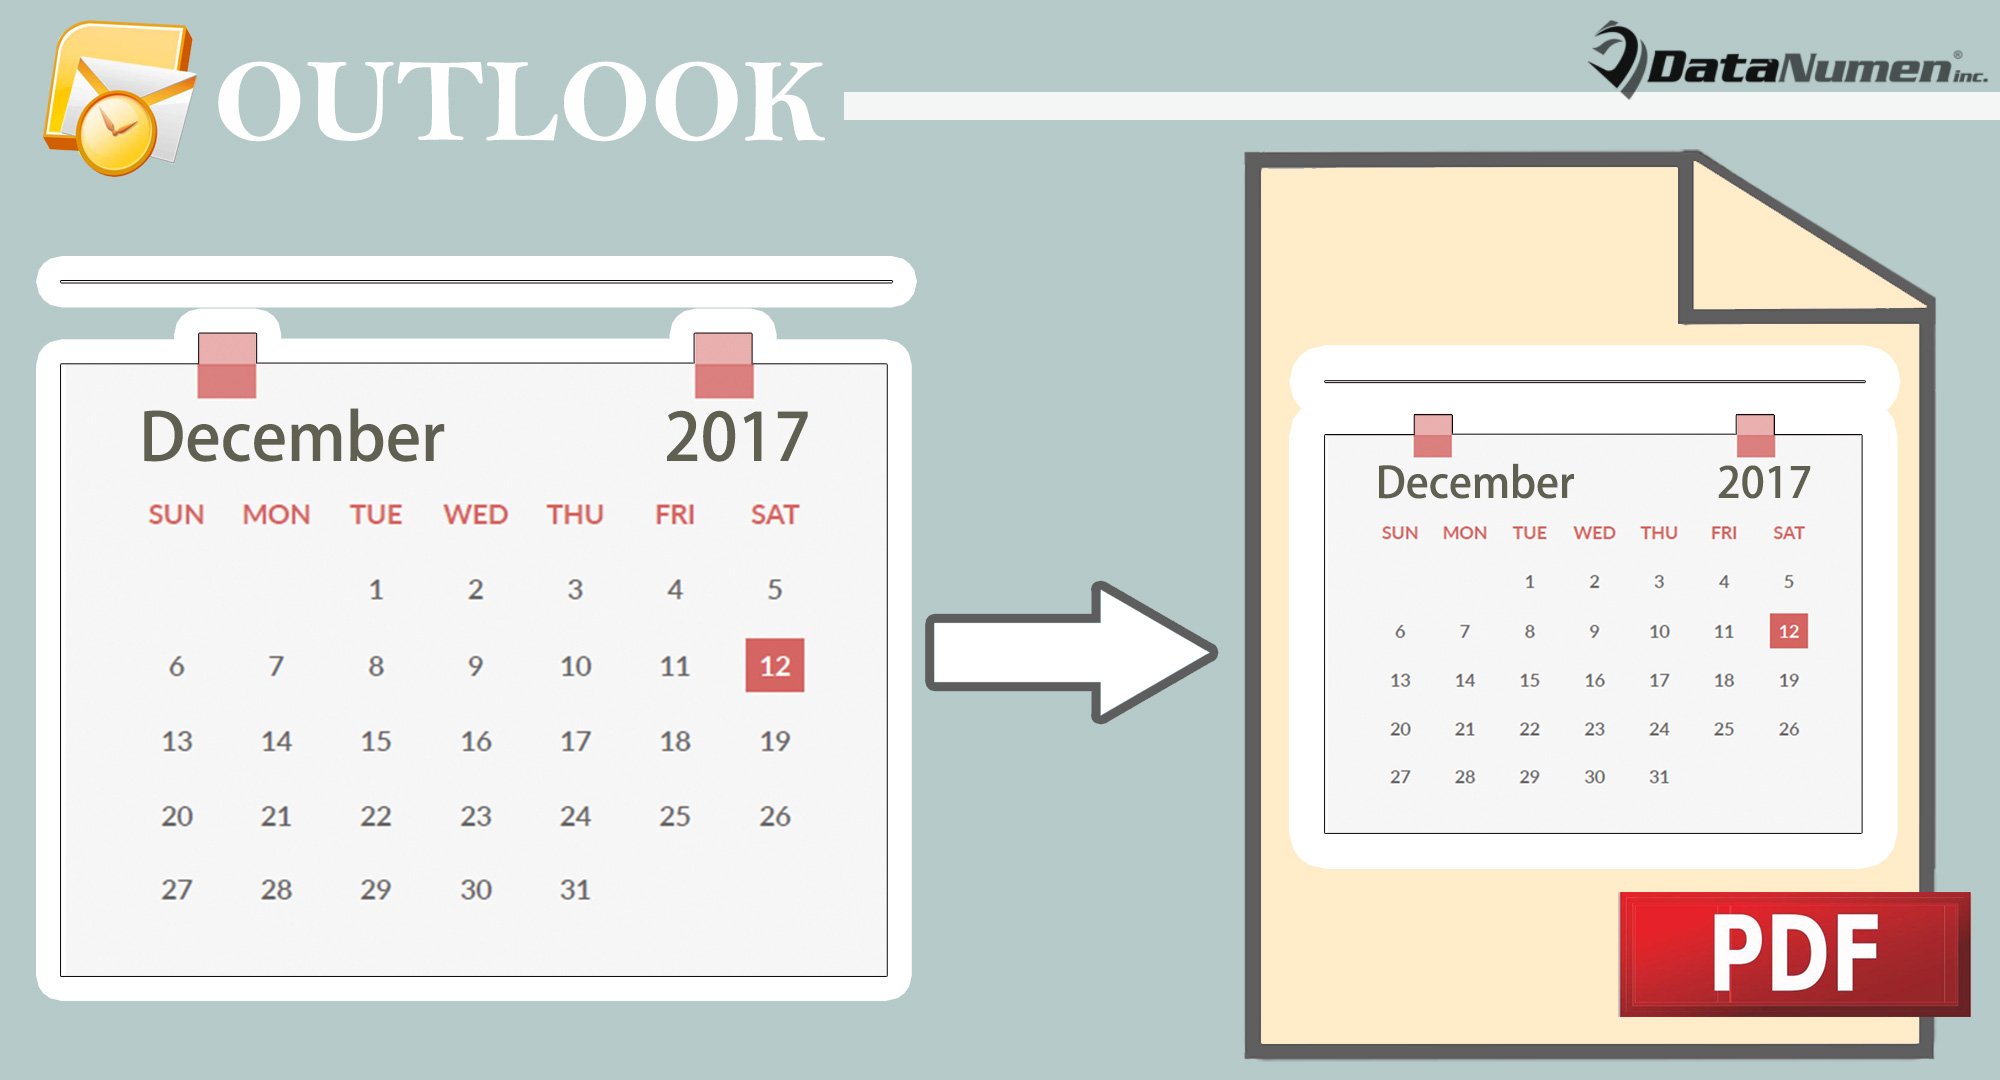 Export Outlook Calendar to a PDF File